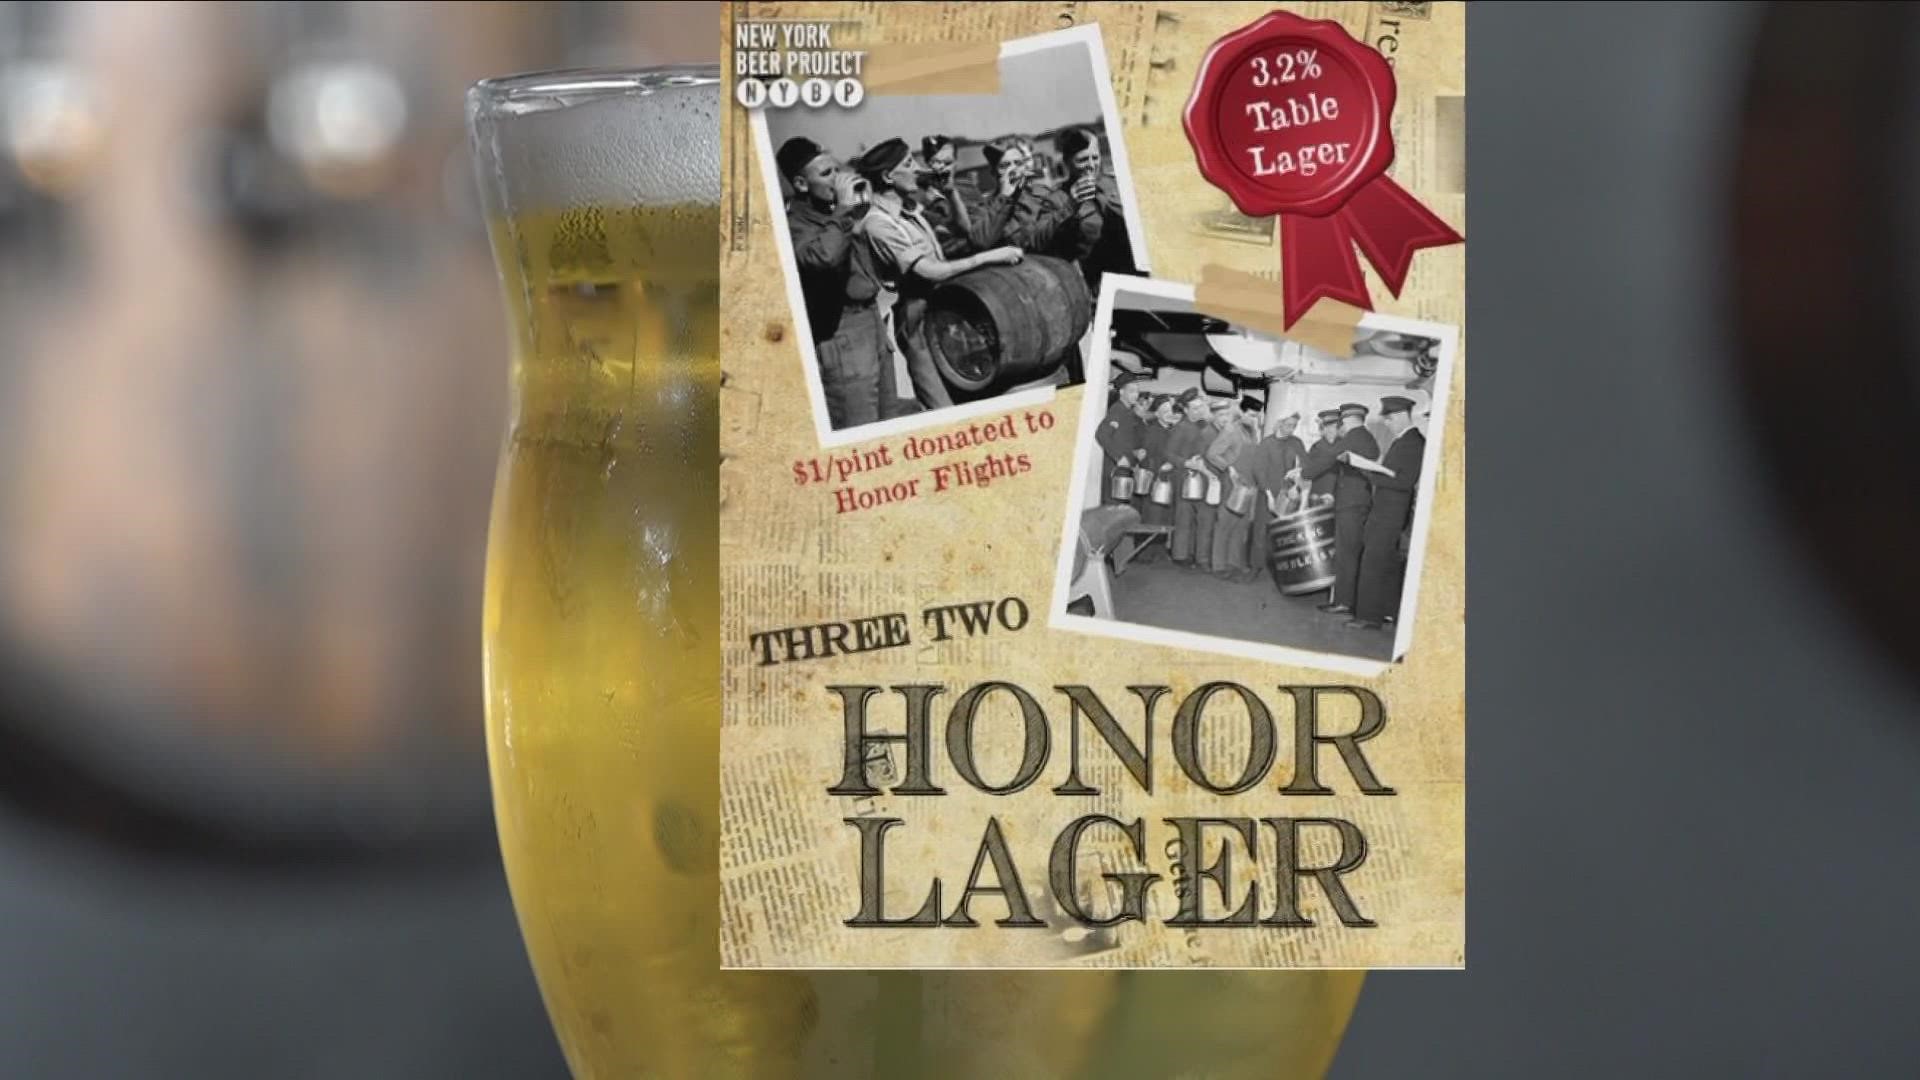 The New York Beer Project is launching a new beer called 3-2 honor lager, to help raise money for Buffalo Niagara honor flight.